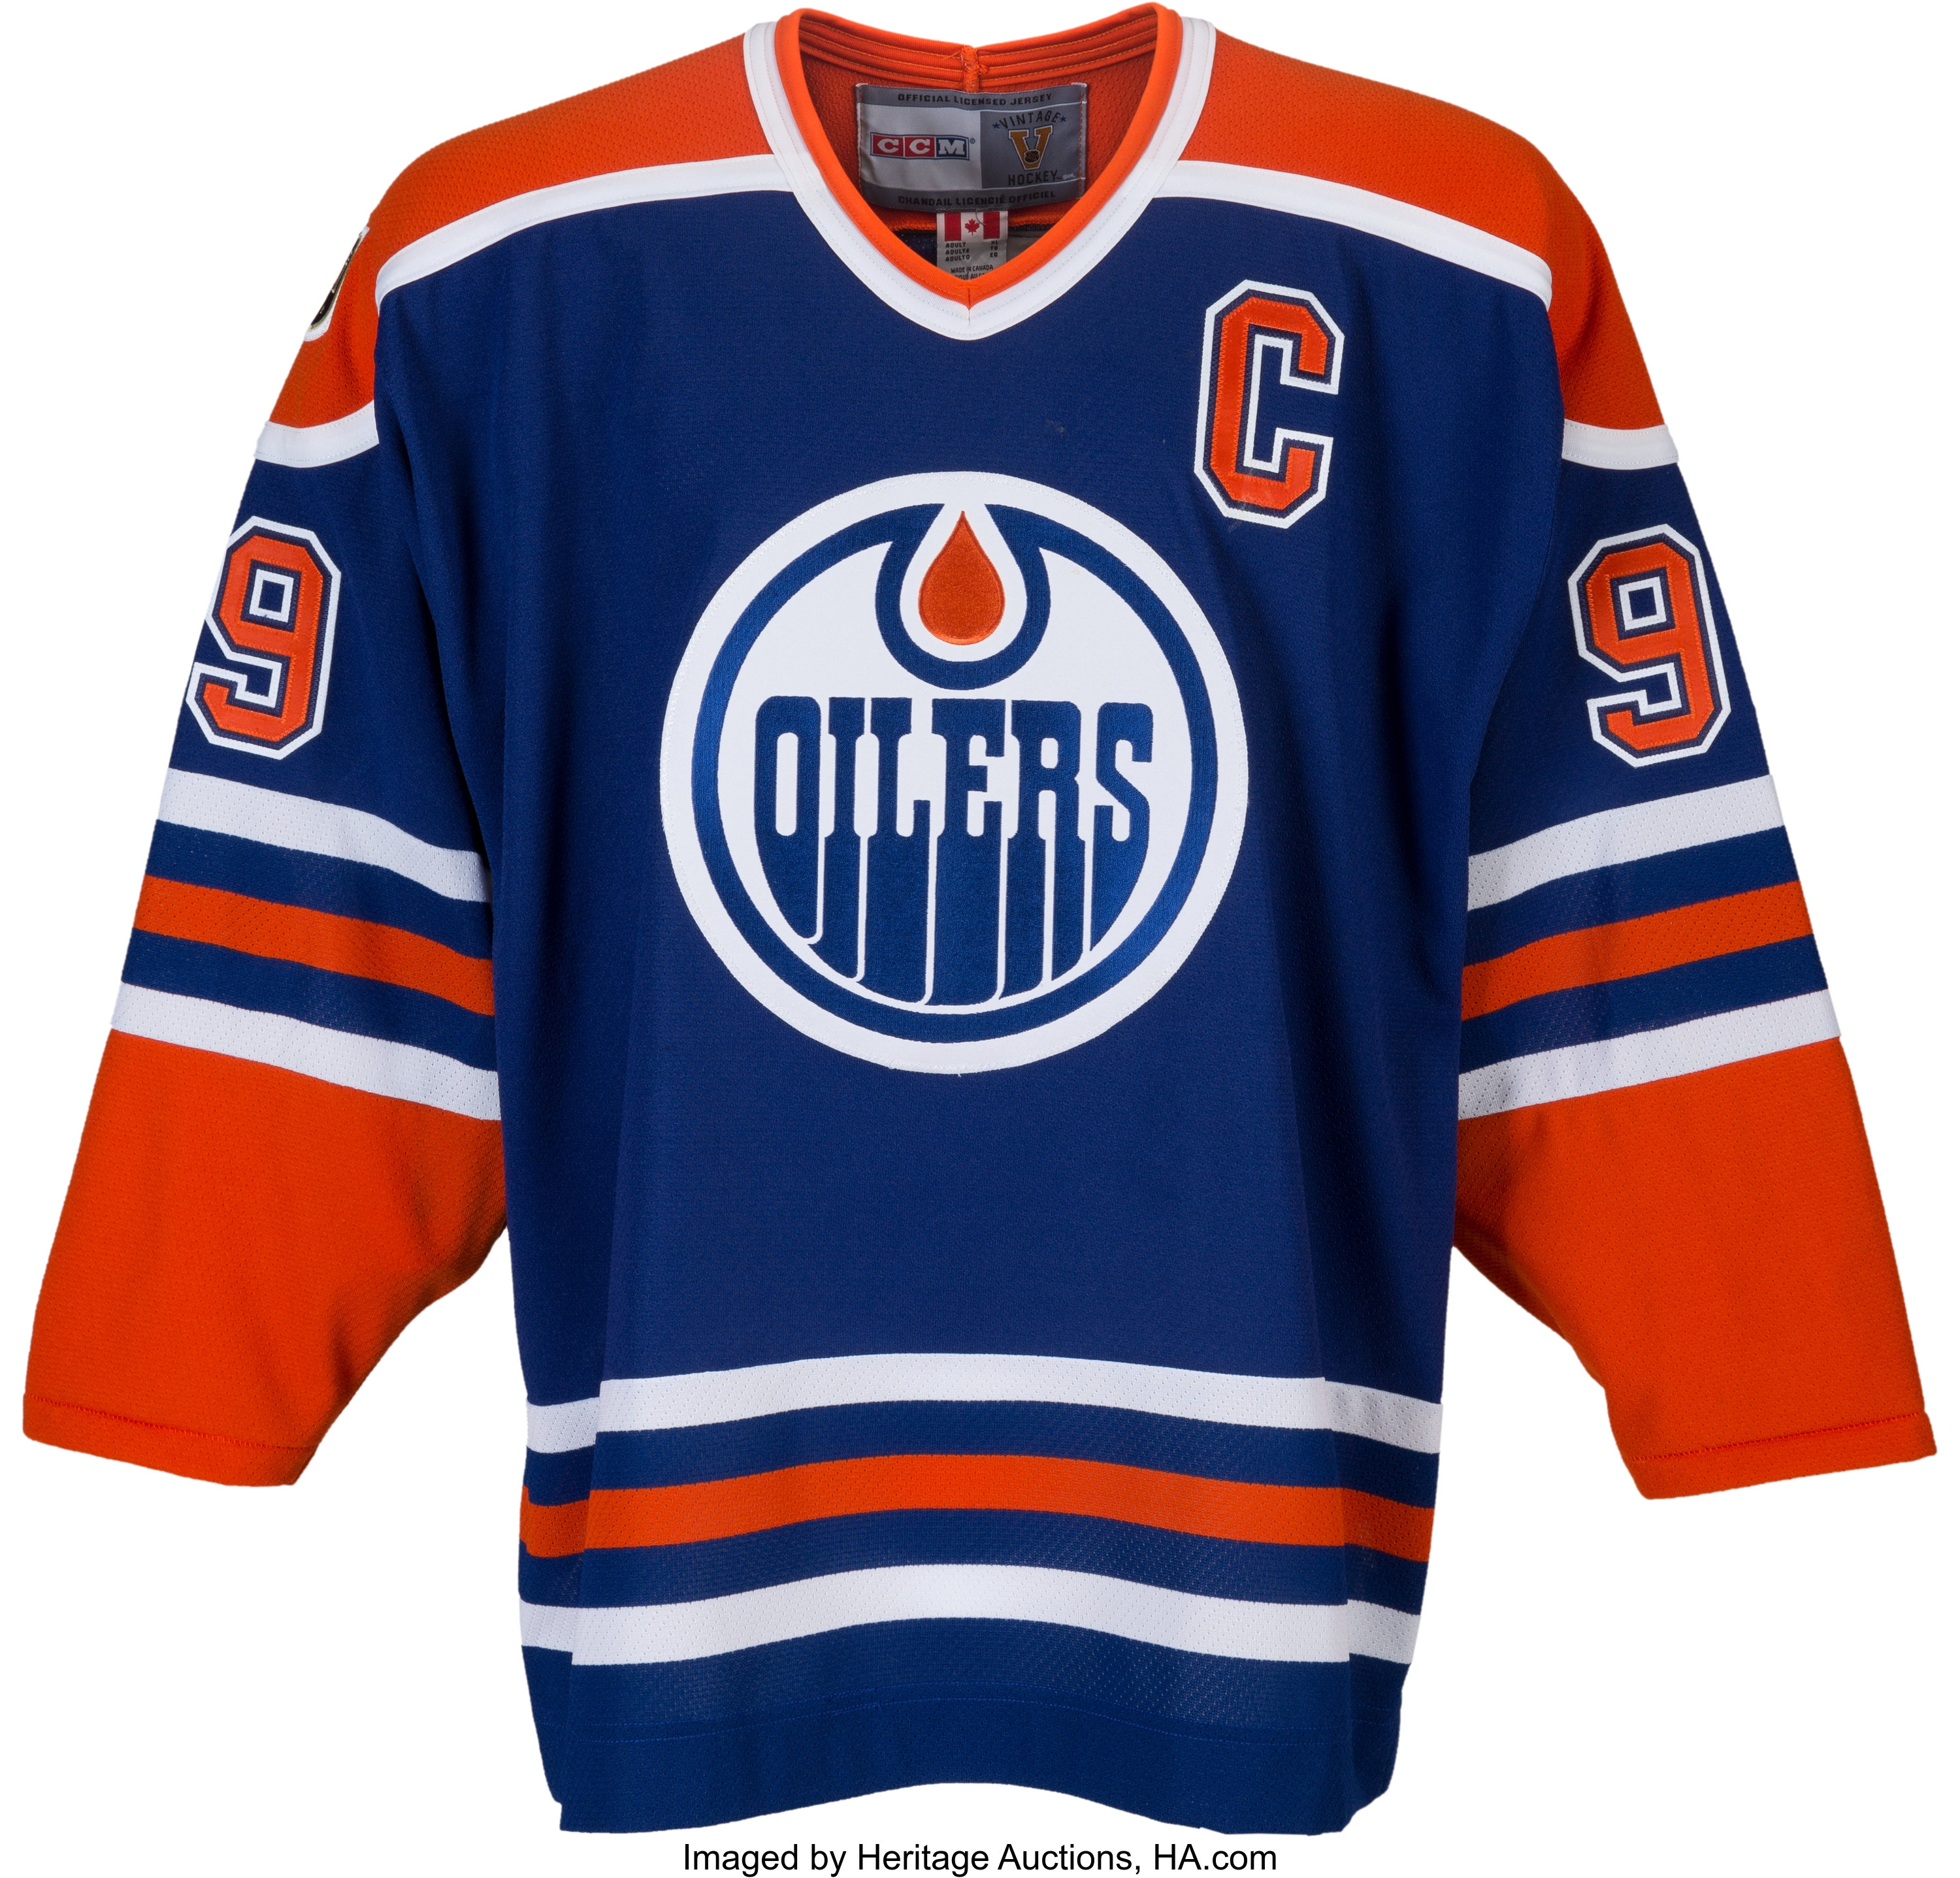 Edmonton Oilers White Hockey Jersey. Brand New With Tags. 